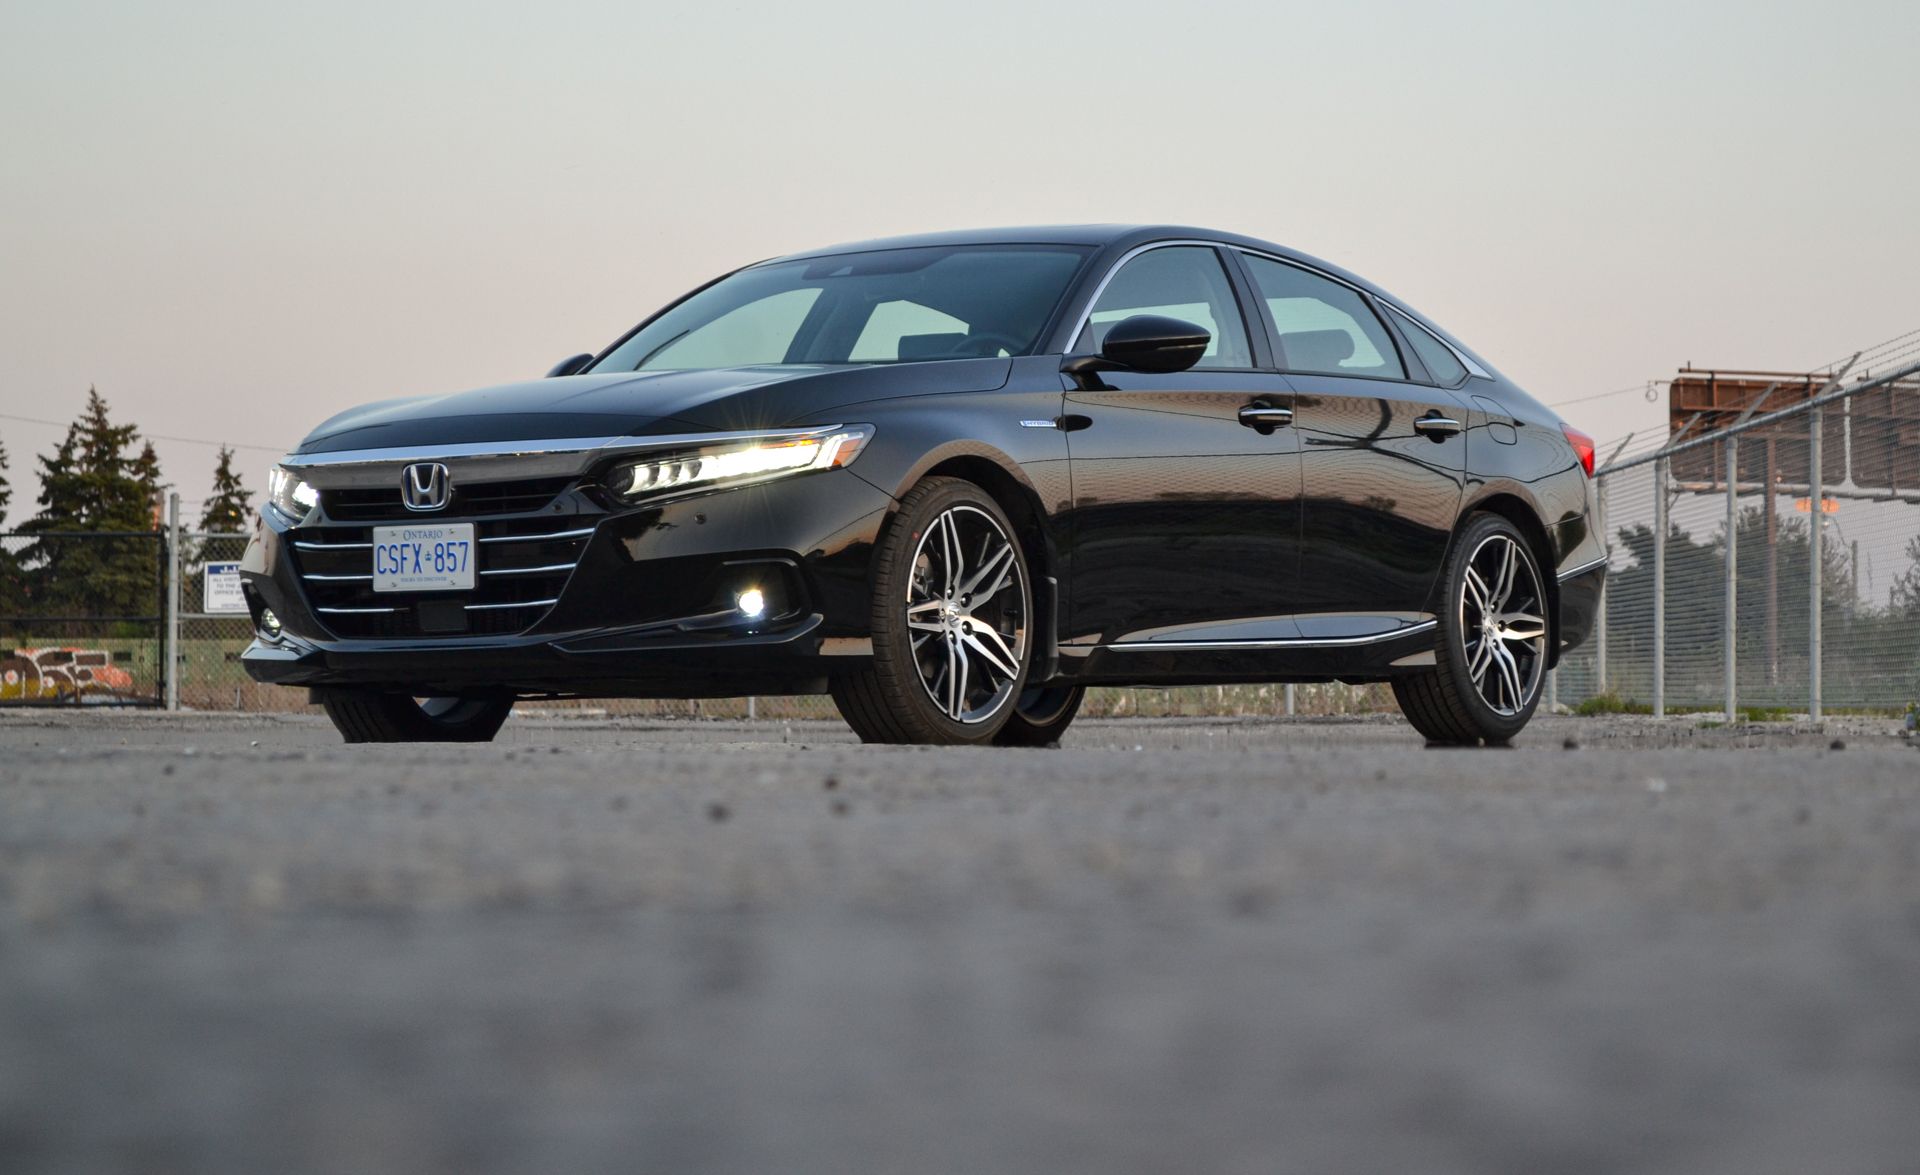 2021 Honda Accord Hybrid Review: The Great All-Rounder - AutoGuide.com